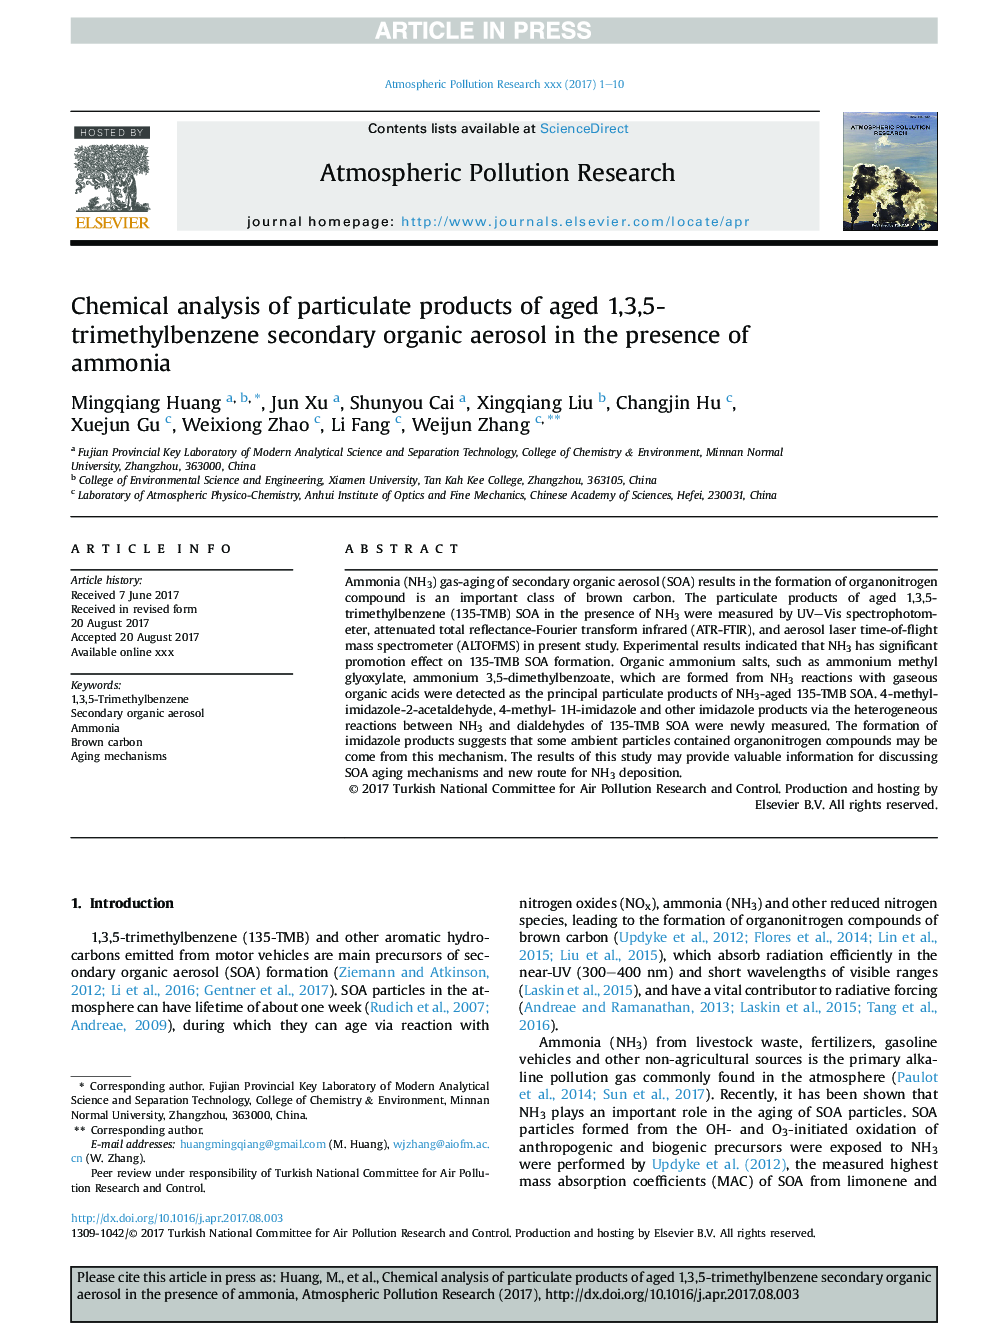 Chemical analysis of particulate products of aged 1,3,5-trimethylbenzene secondary organic aerosol in the presence of ammonia